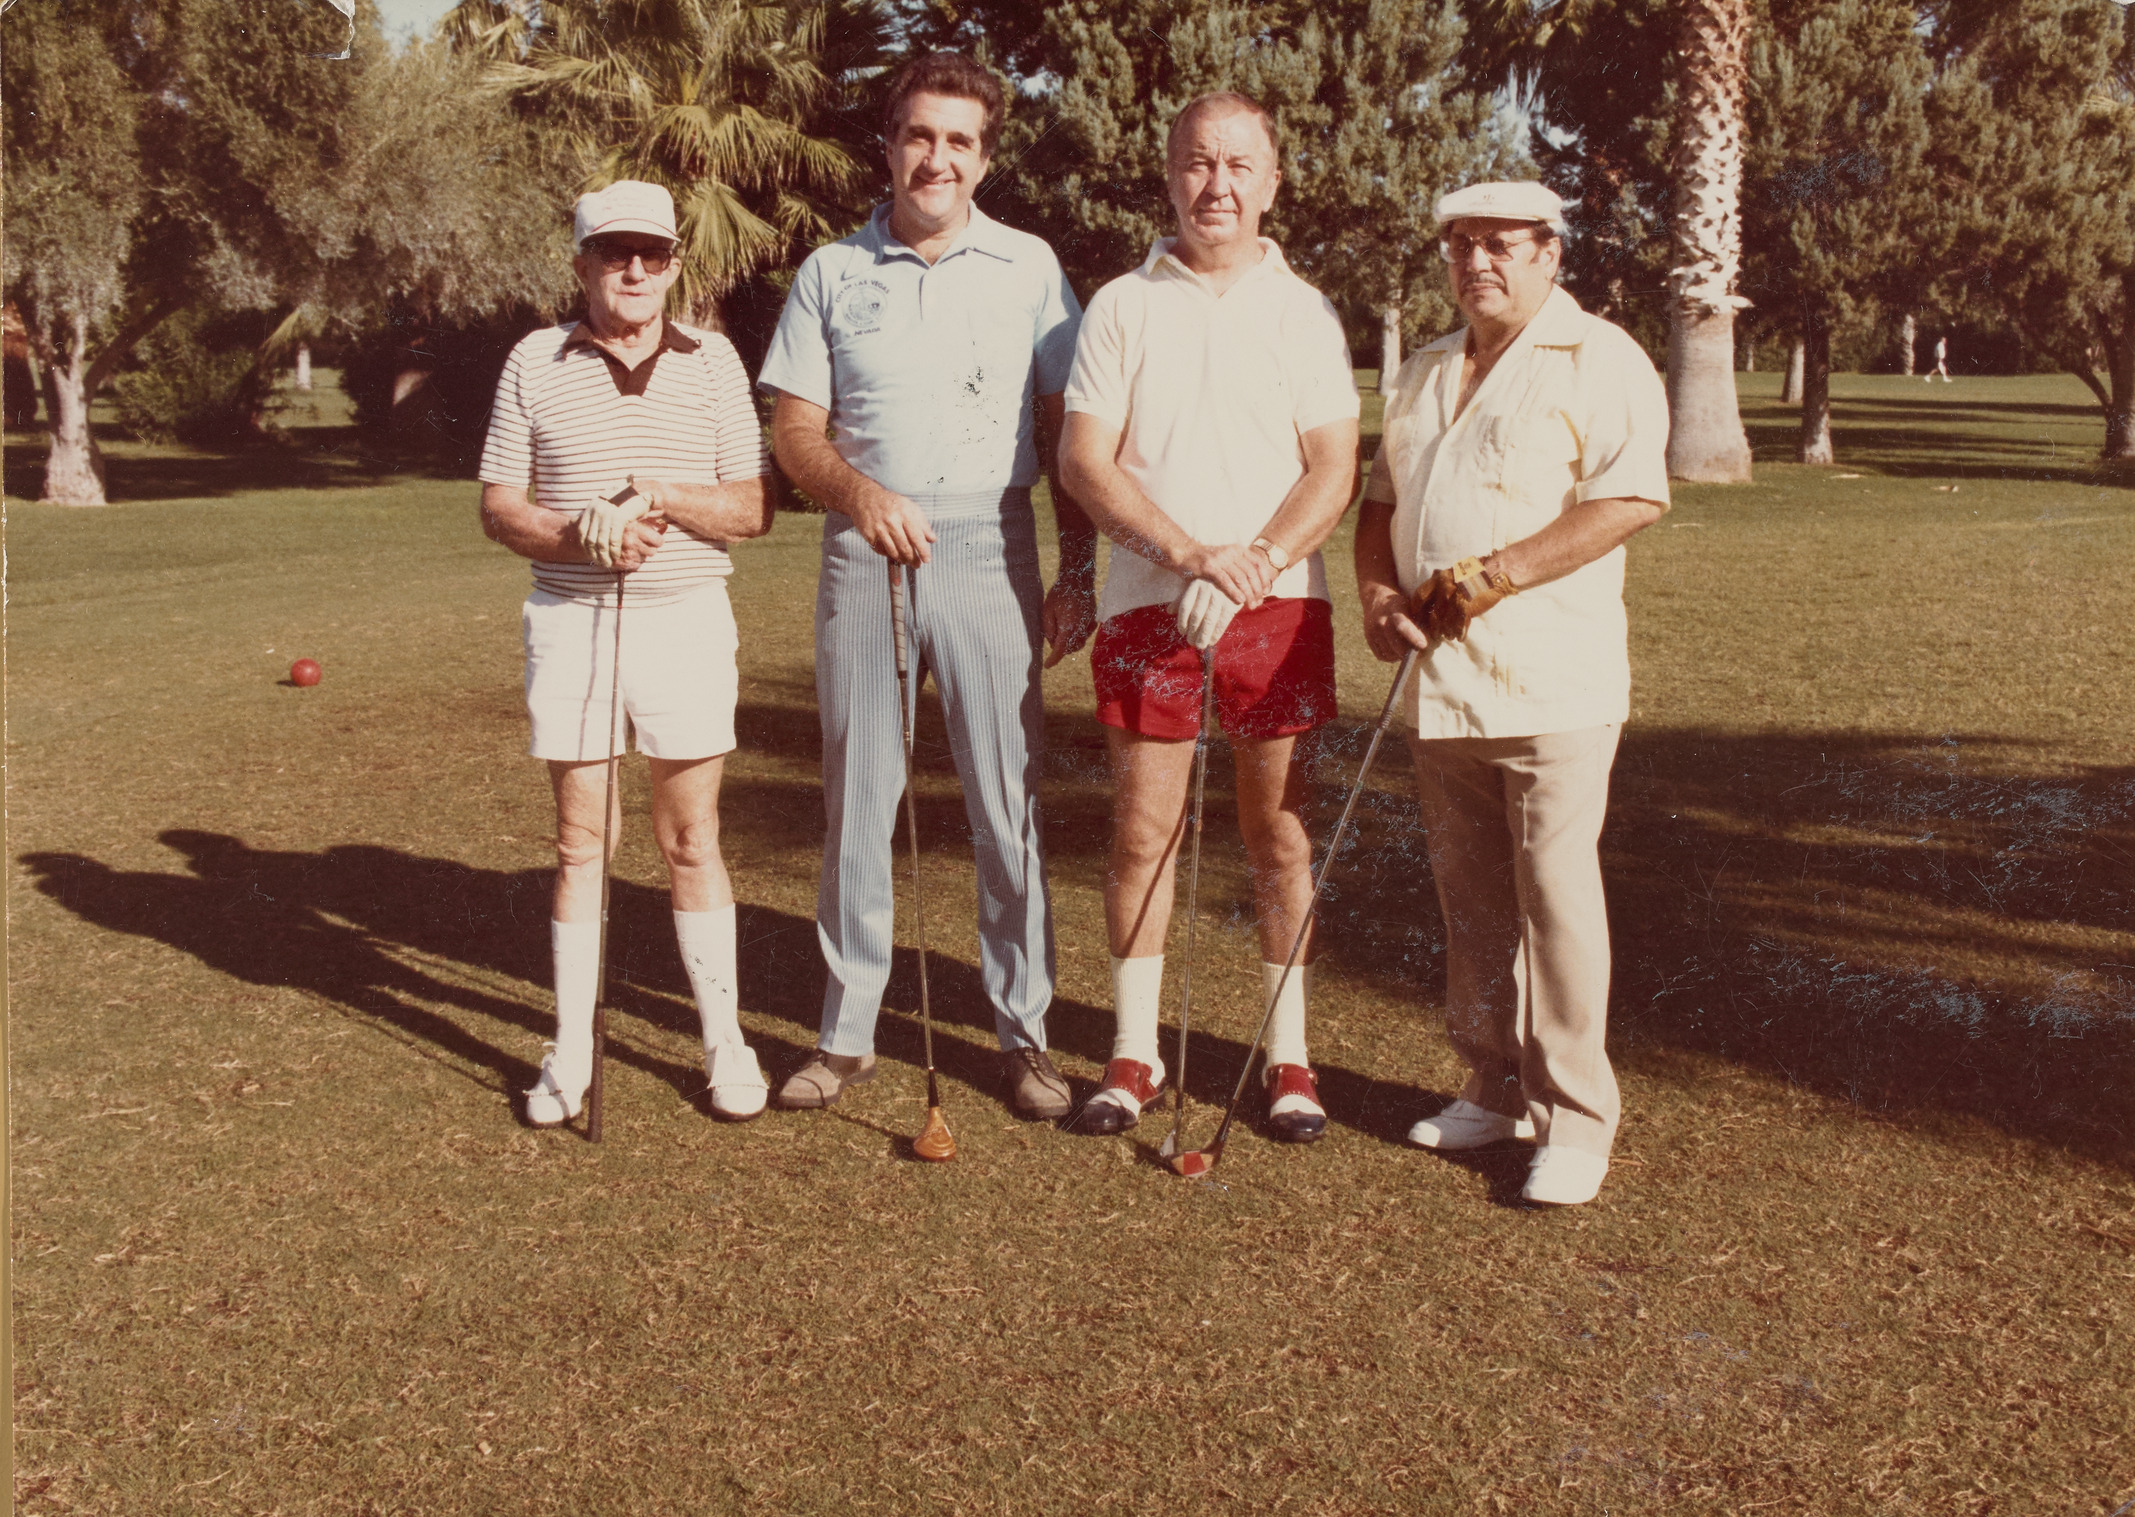 Photograph of Ron Lurie with Herb Gallup, Bernie Fritz (FBI), Herman Gallindo (LV Distributor) at Dunes Hotel Golf Tournament, Teamster 14